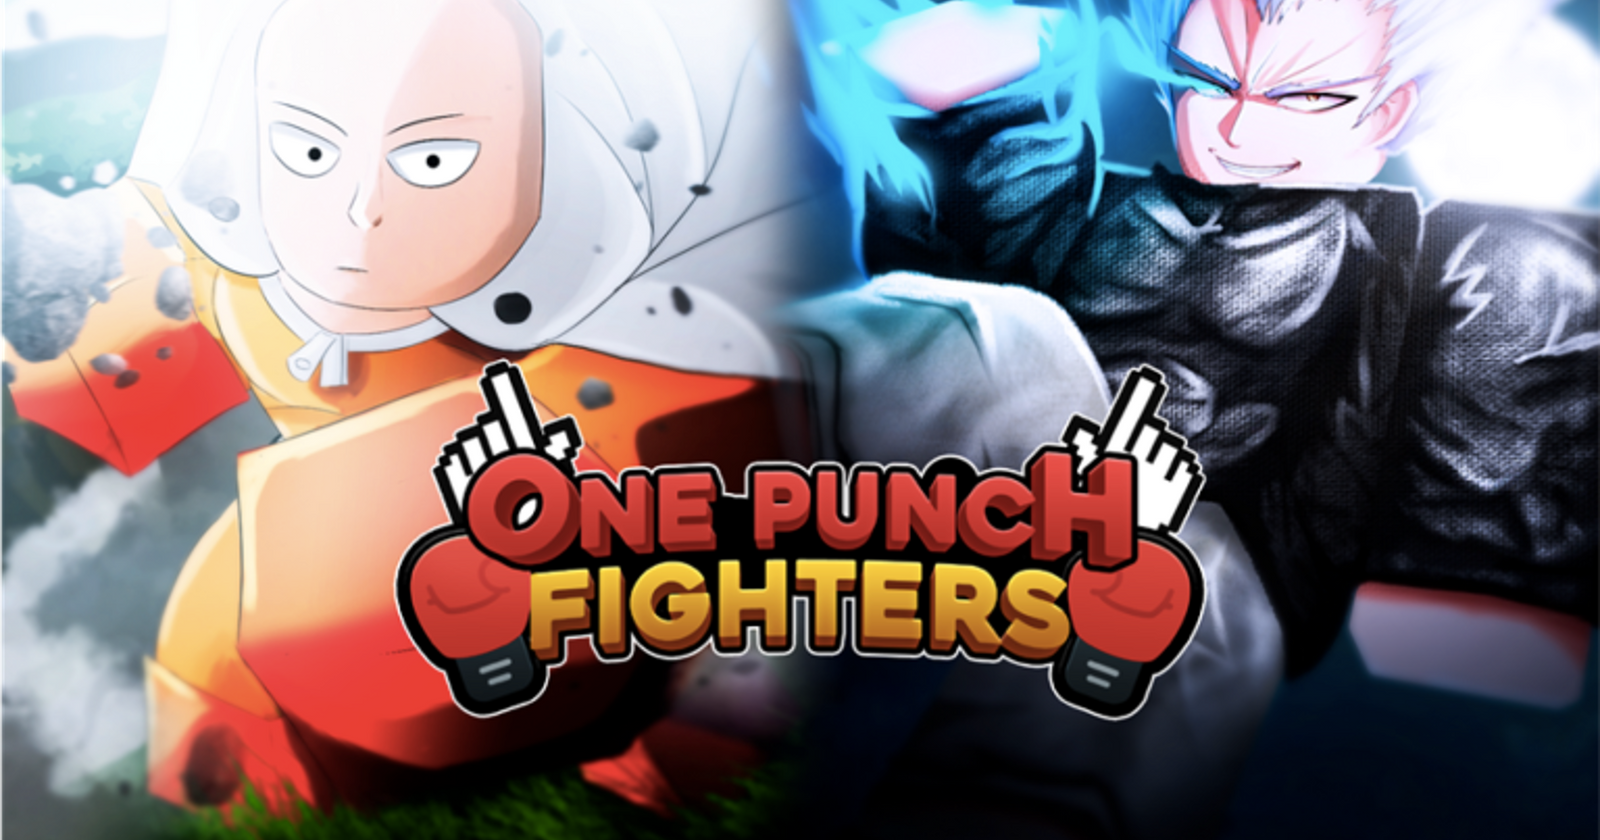 One Punch Hero Codes - Roblox December 2023 